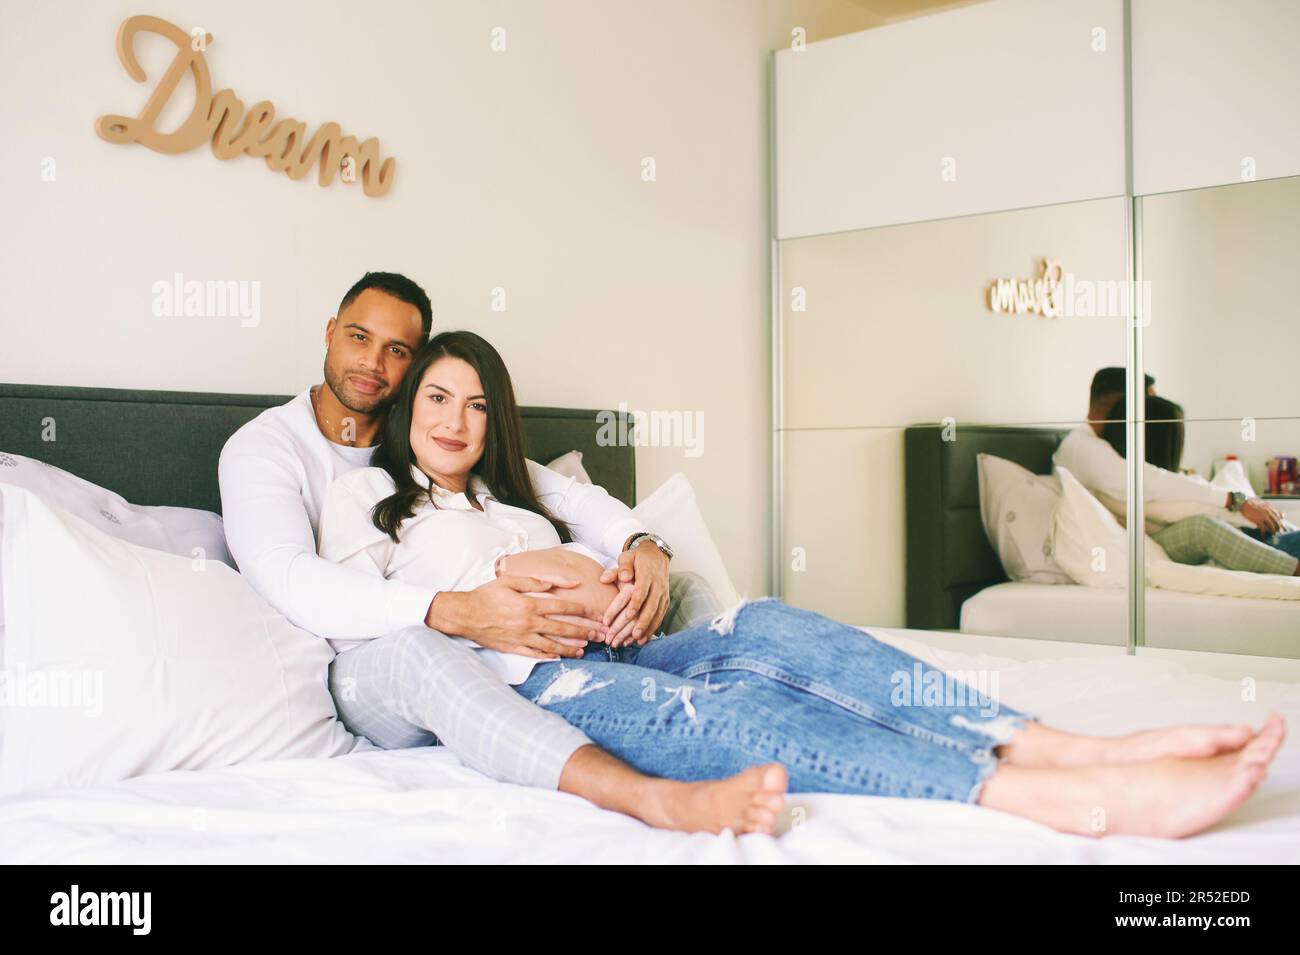 Indoor portrait of happy young family, pregnant woman with her loving husband relaxing on bed Stock Photo